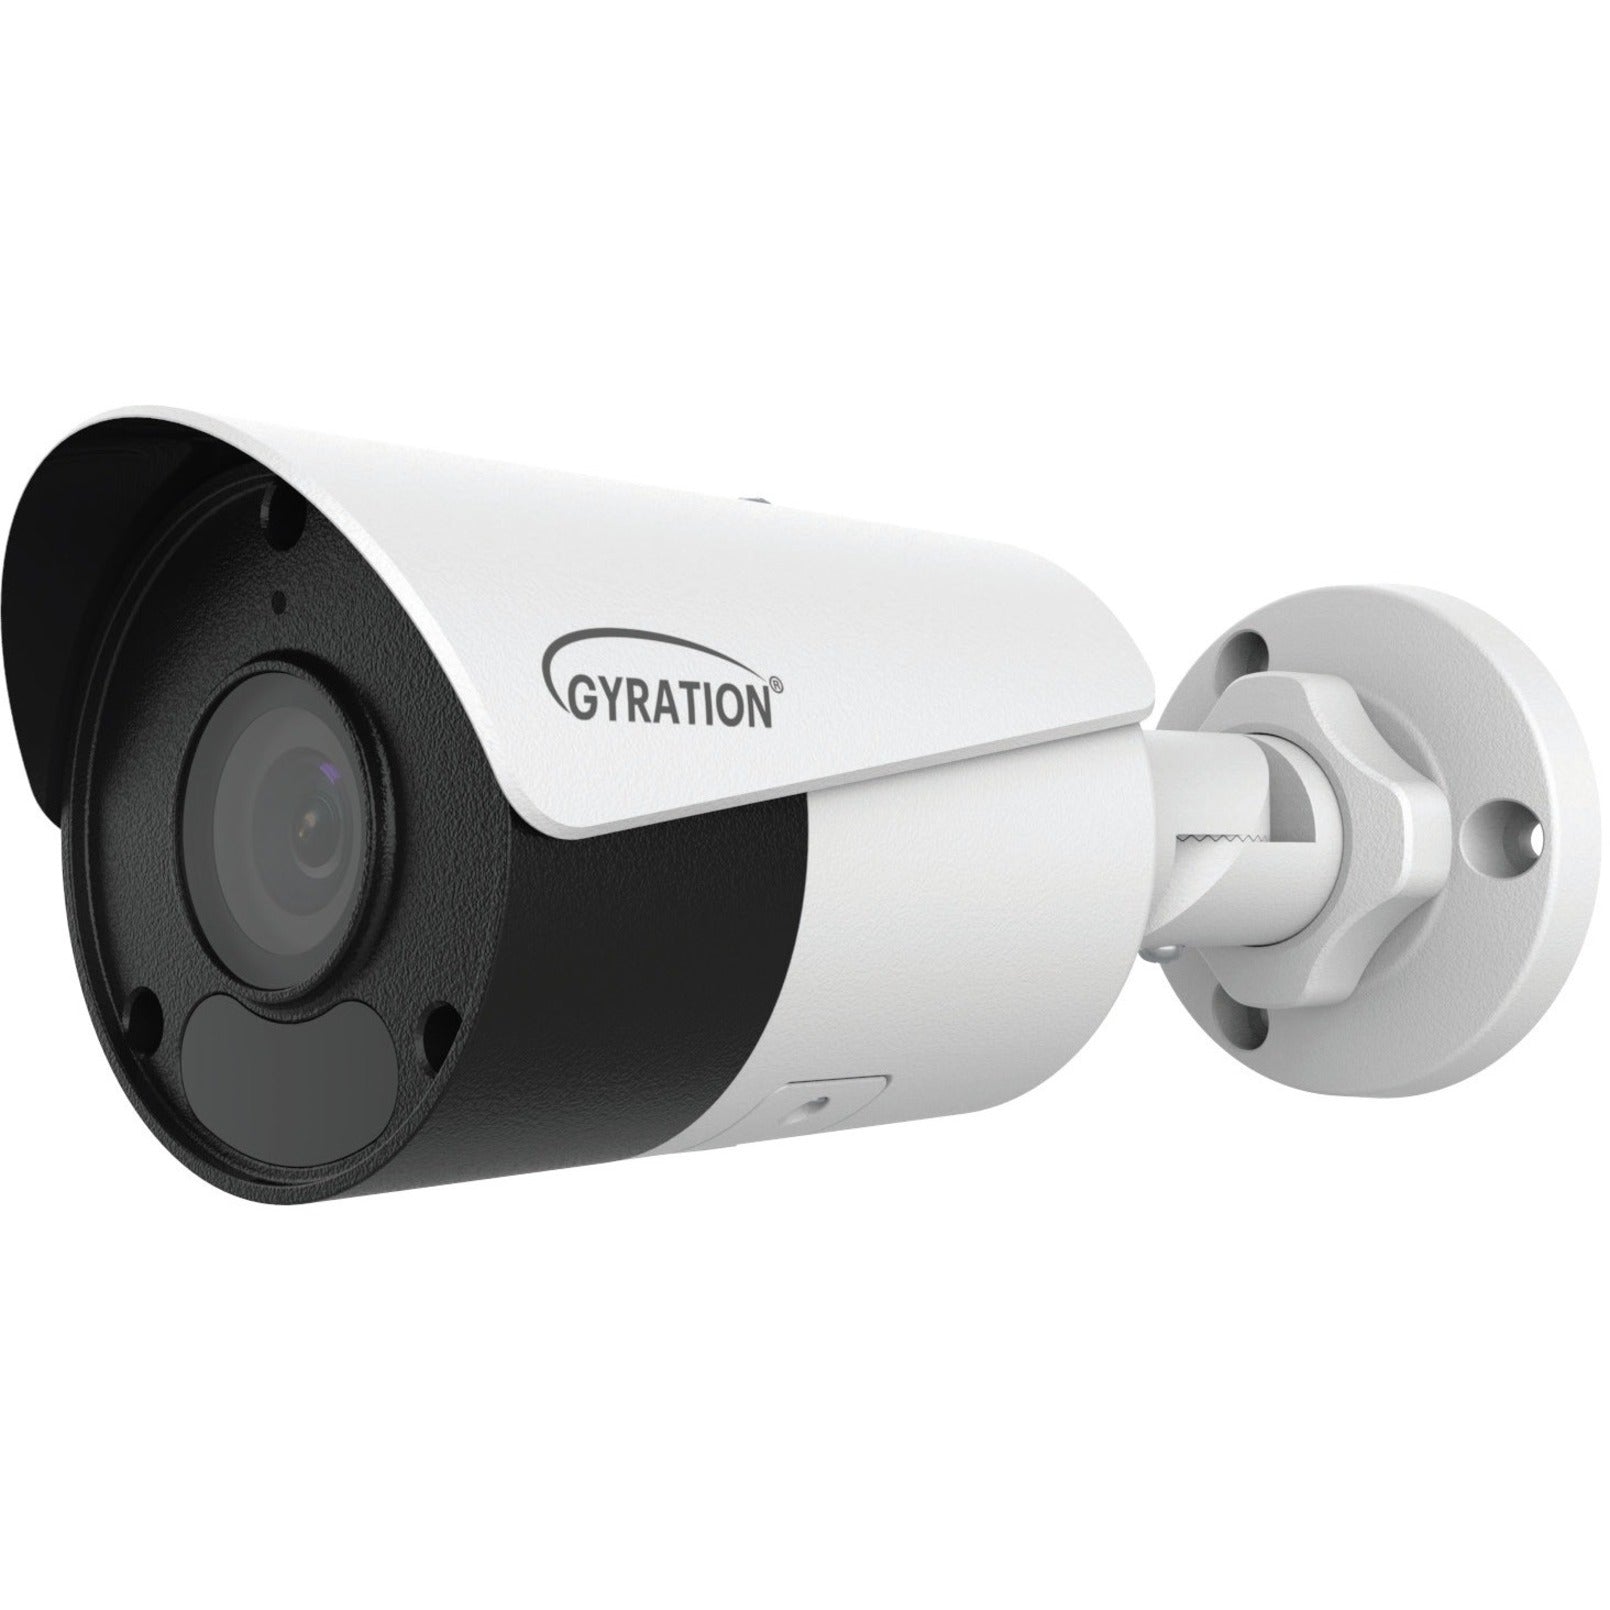 Gyration CYBERVIEW 400B 4 MP Outdoor IR Fixed Bullet Camera, Wide Dynamic Range, Motion Detection, IP67